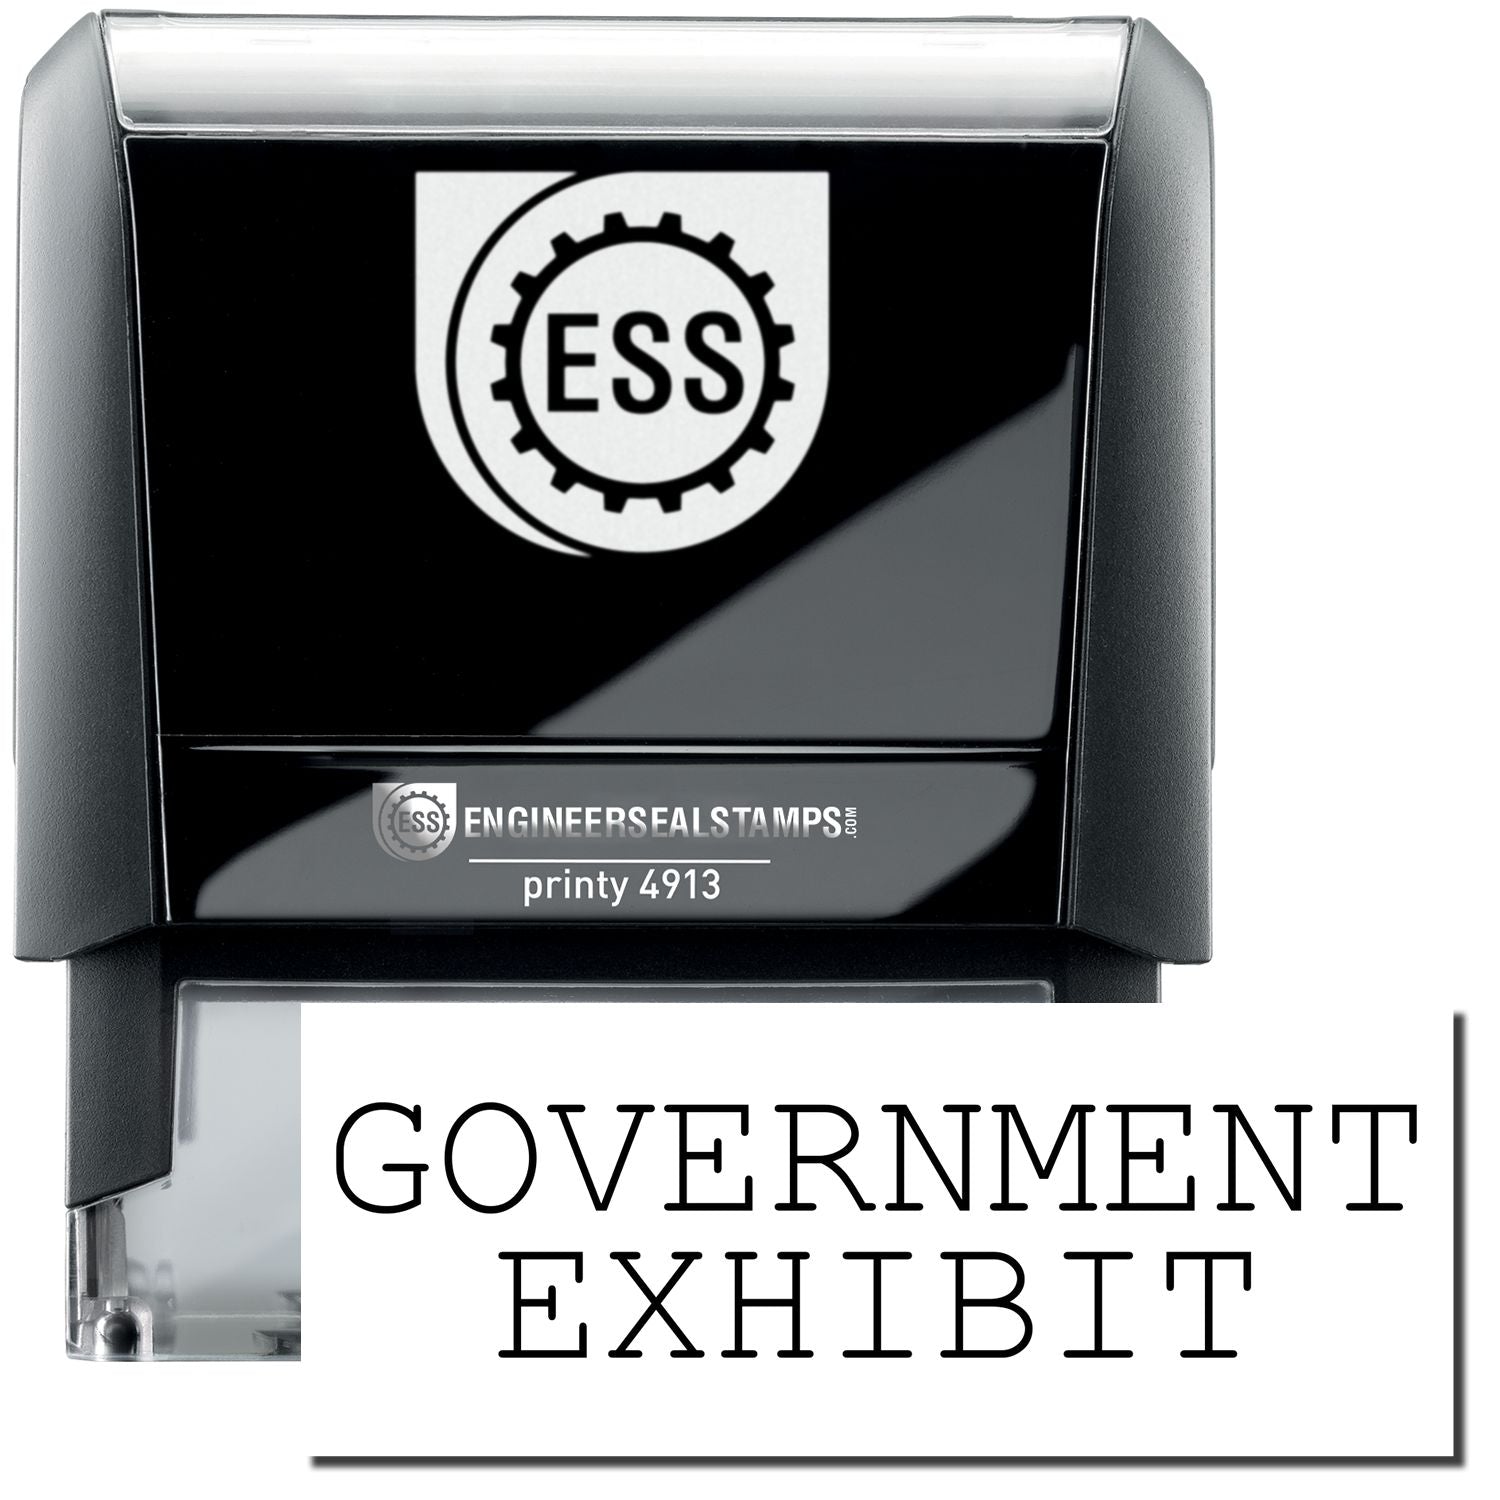 A self-inking stamp with a stamped image showing how the text "GOVERNMENT EXHIBIT" in a large font is displayed by it.